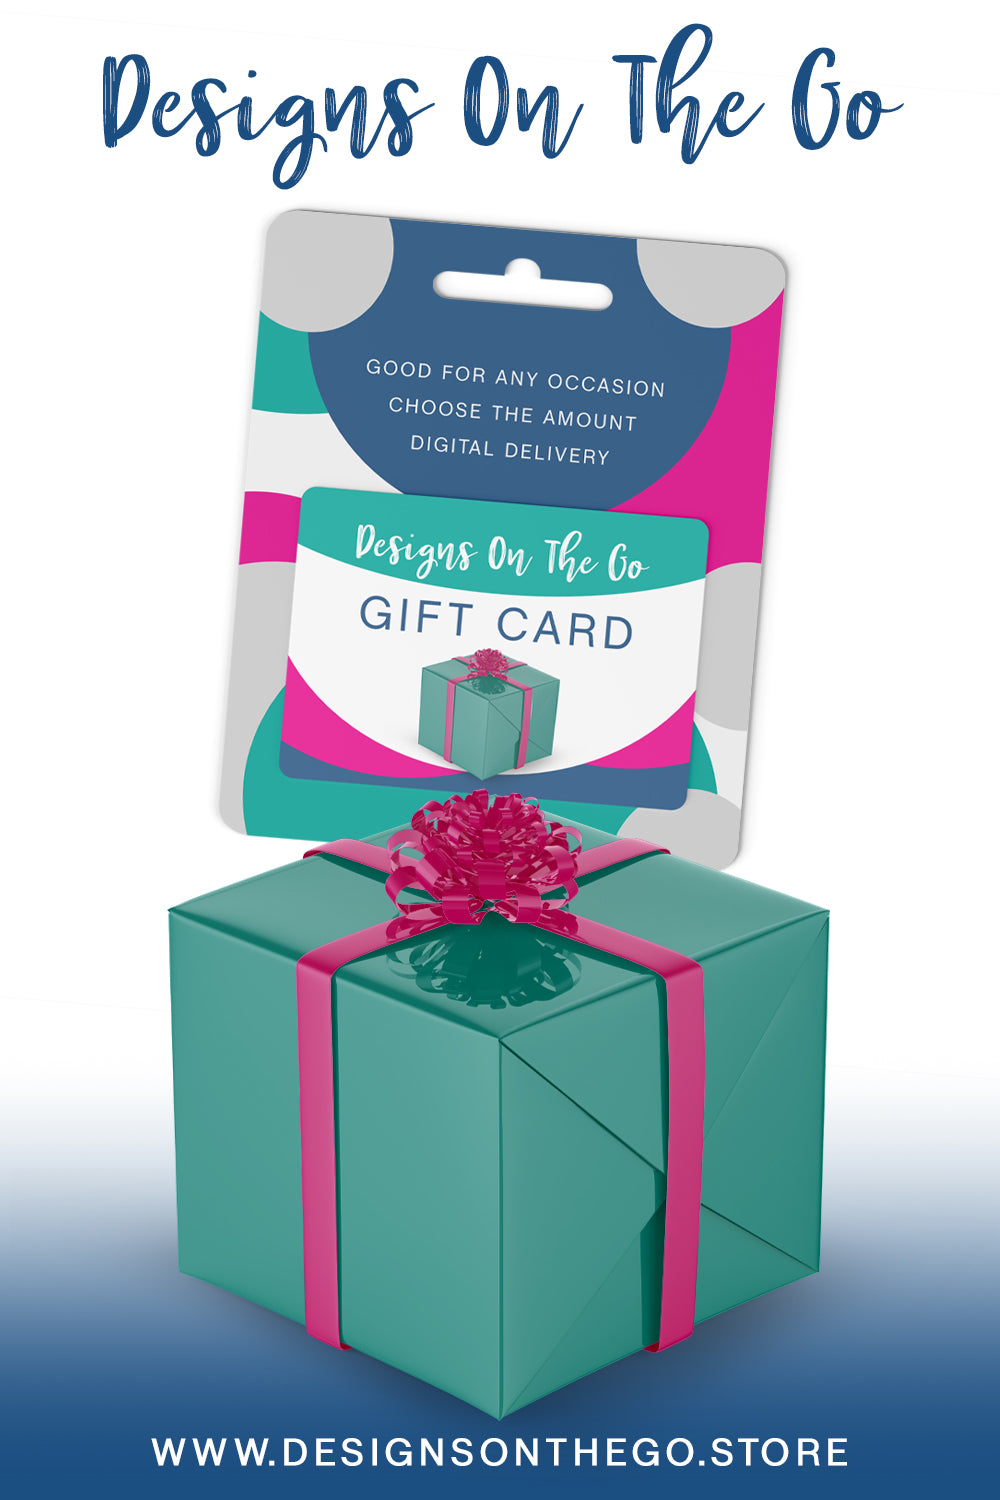 Designs On The Go Gift Card